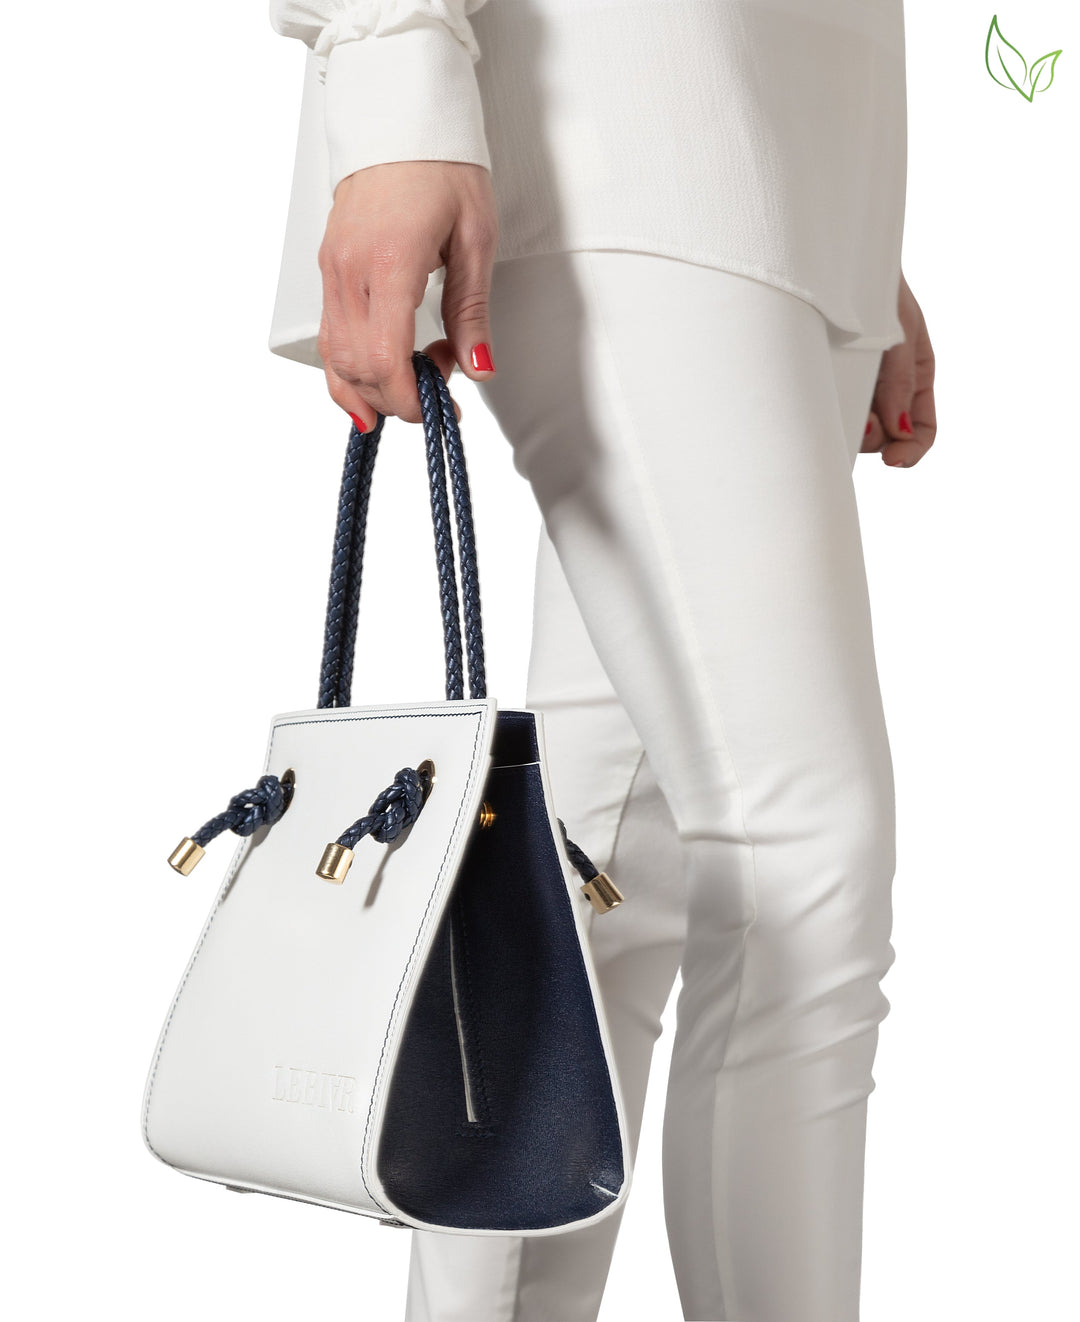 Woman holding a stylish white handbag with blue accents while wearing white outfit